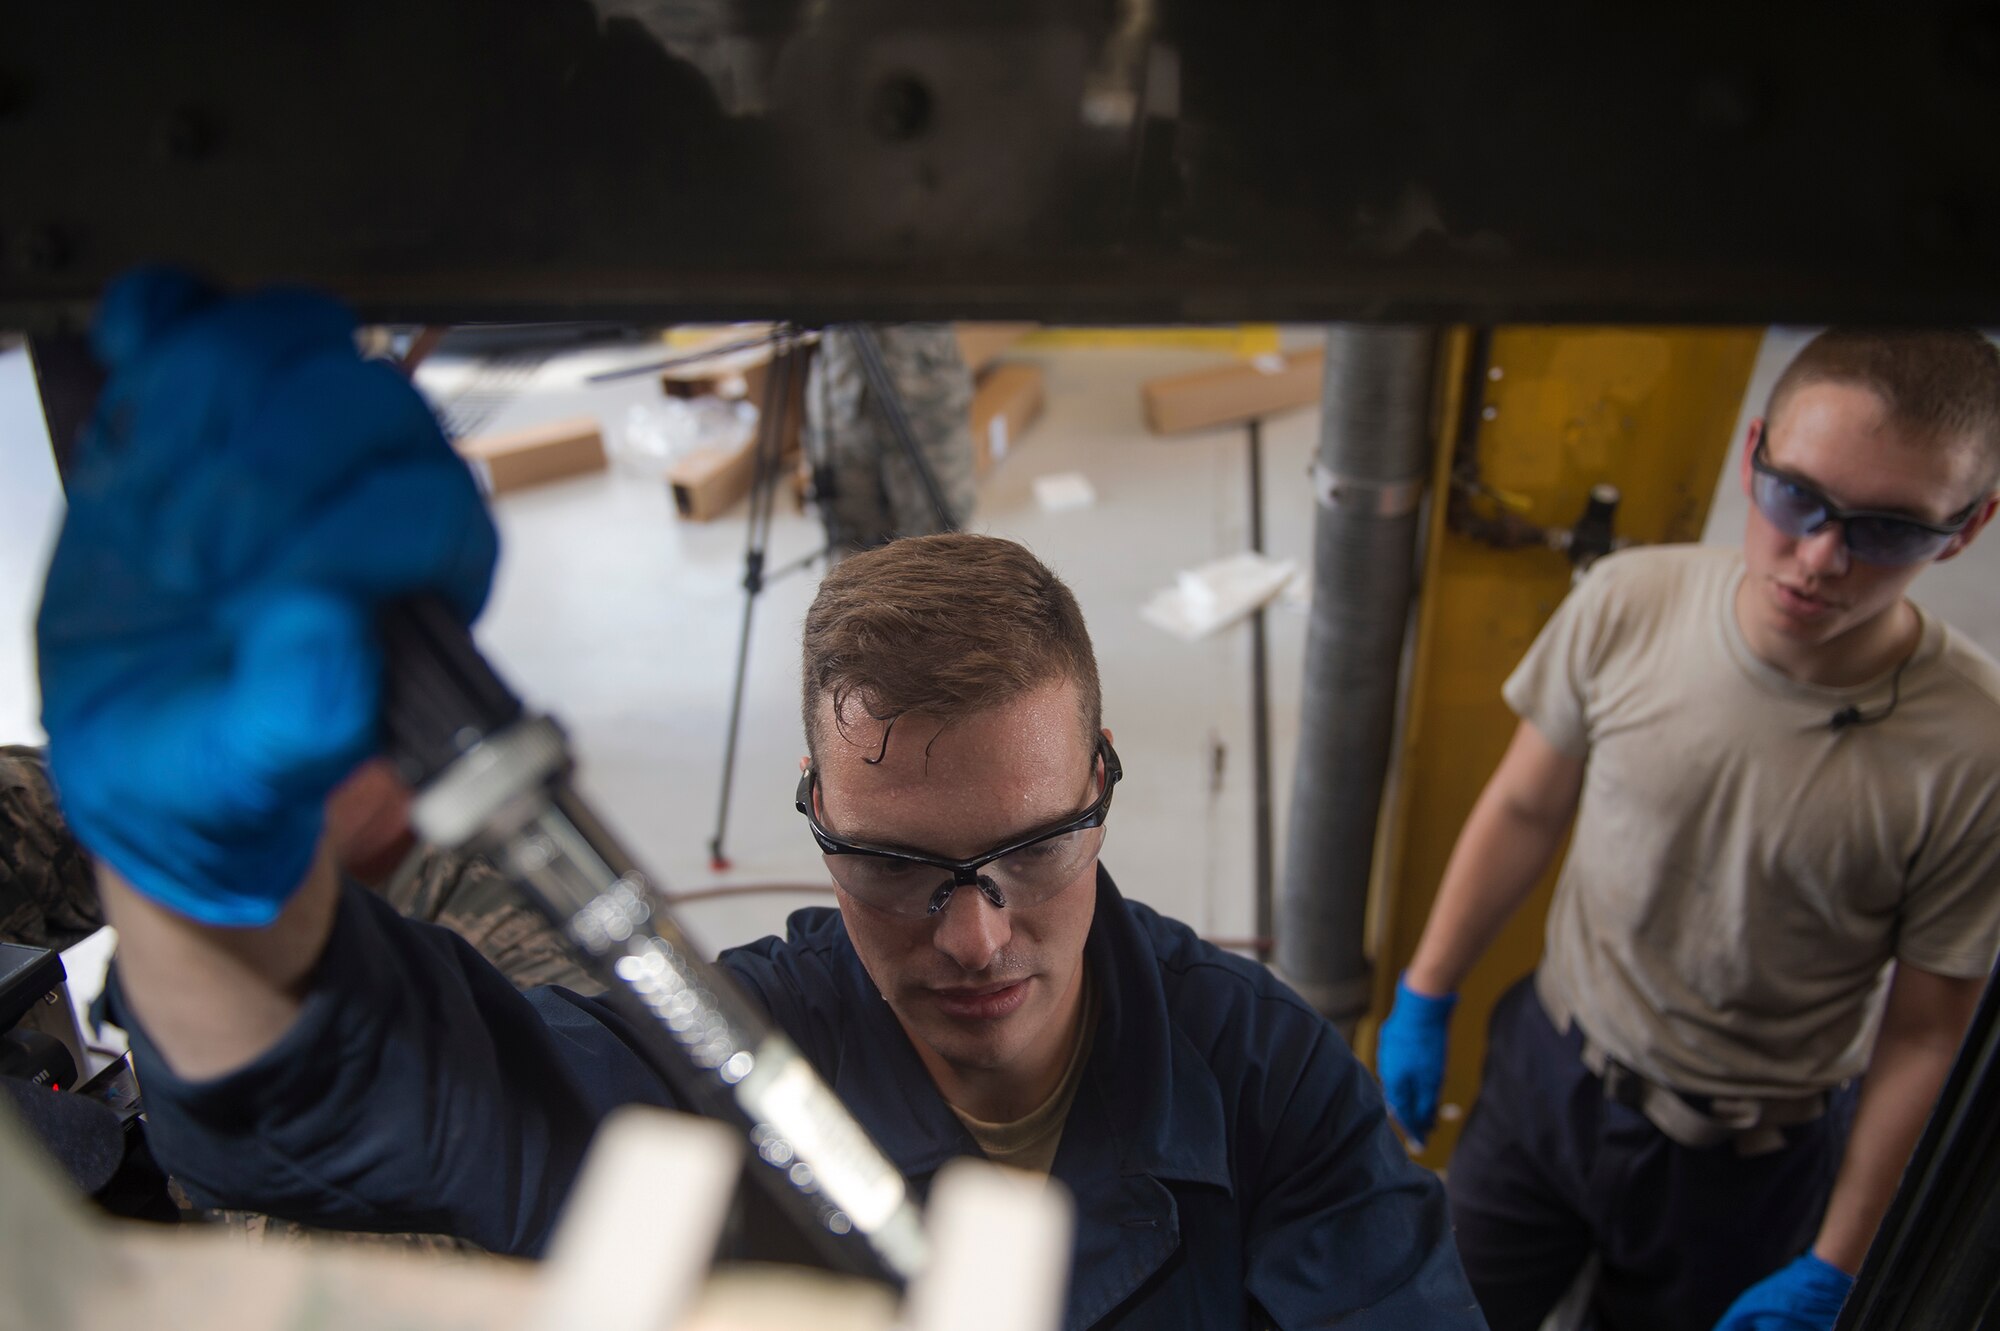 Senior Airman Kyle Saunders, 23d Wing Public Affairs broadcaster, left, receives coaching from Airman 1st Class Charles Price 23d Logistics Readiness Squadron vehicle maintenance specialist, during the ‘A Closer Look,’ video series, July 13, 2017, at Moody Air Force Base, Ga. The series shows 23d WG PA broadcasters experiencing the grit and grime of several trades for Airmen to better understand and appreciate different missions. To watch the series, stay tuned for the premier on the Moody Facebook page and www.moody.af.mil, August 15. (U.S. Air Force photo by Senior Airman Greg Nash)